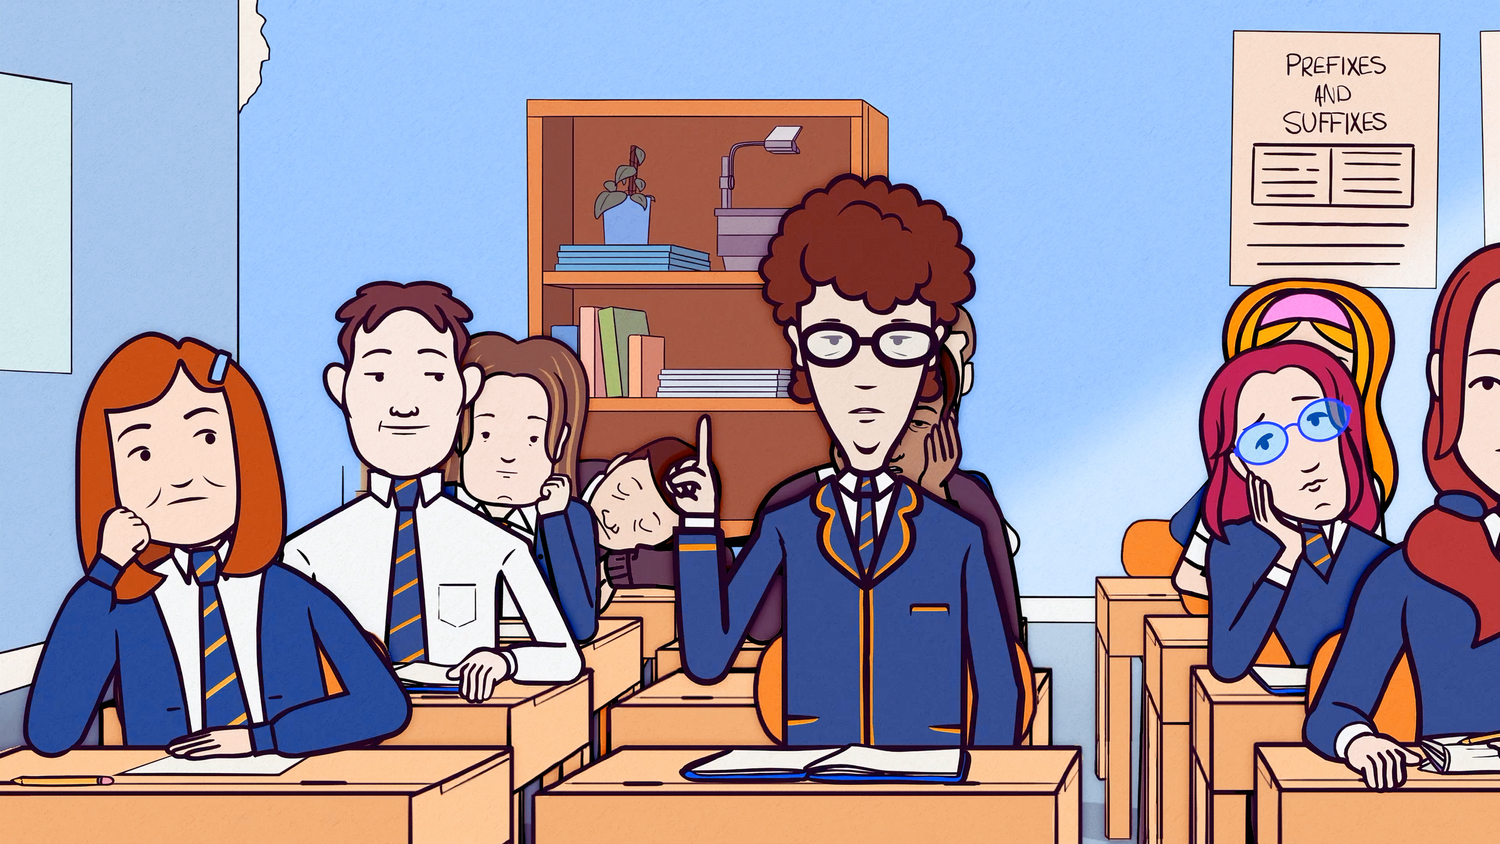 Animated scene from "My Old School"